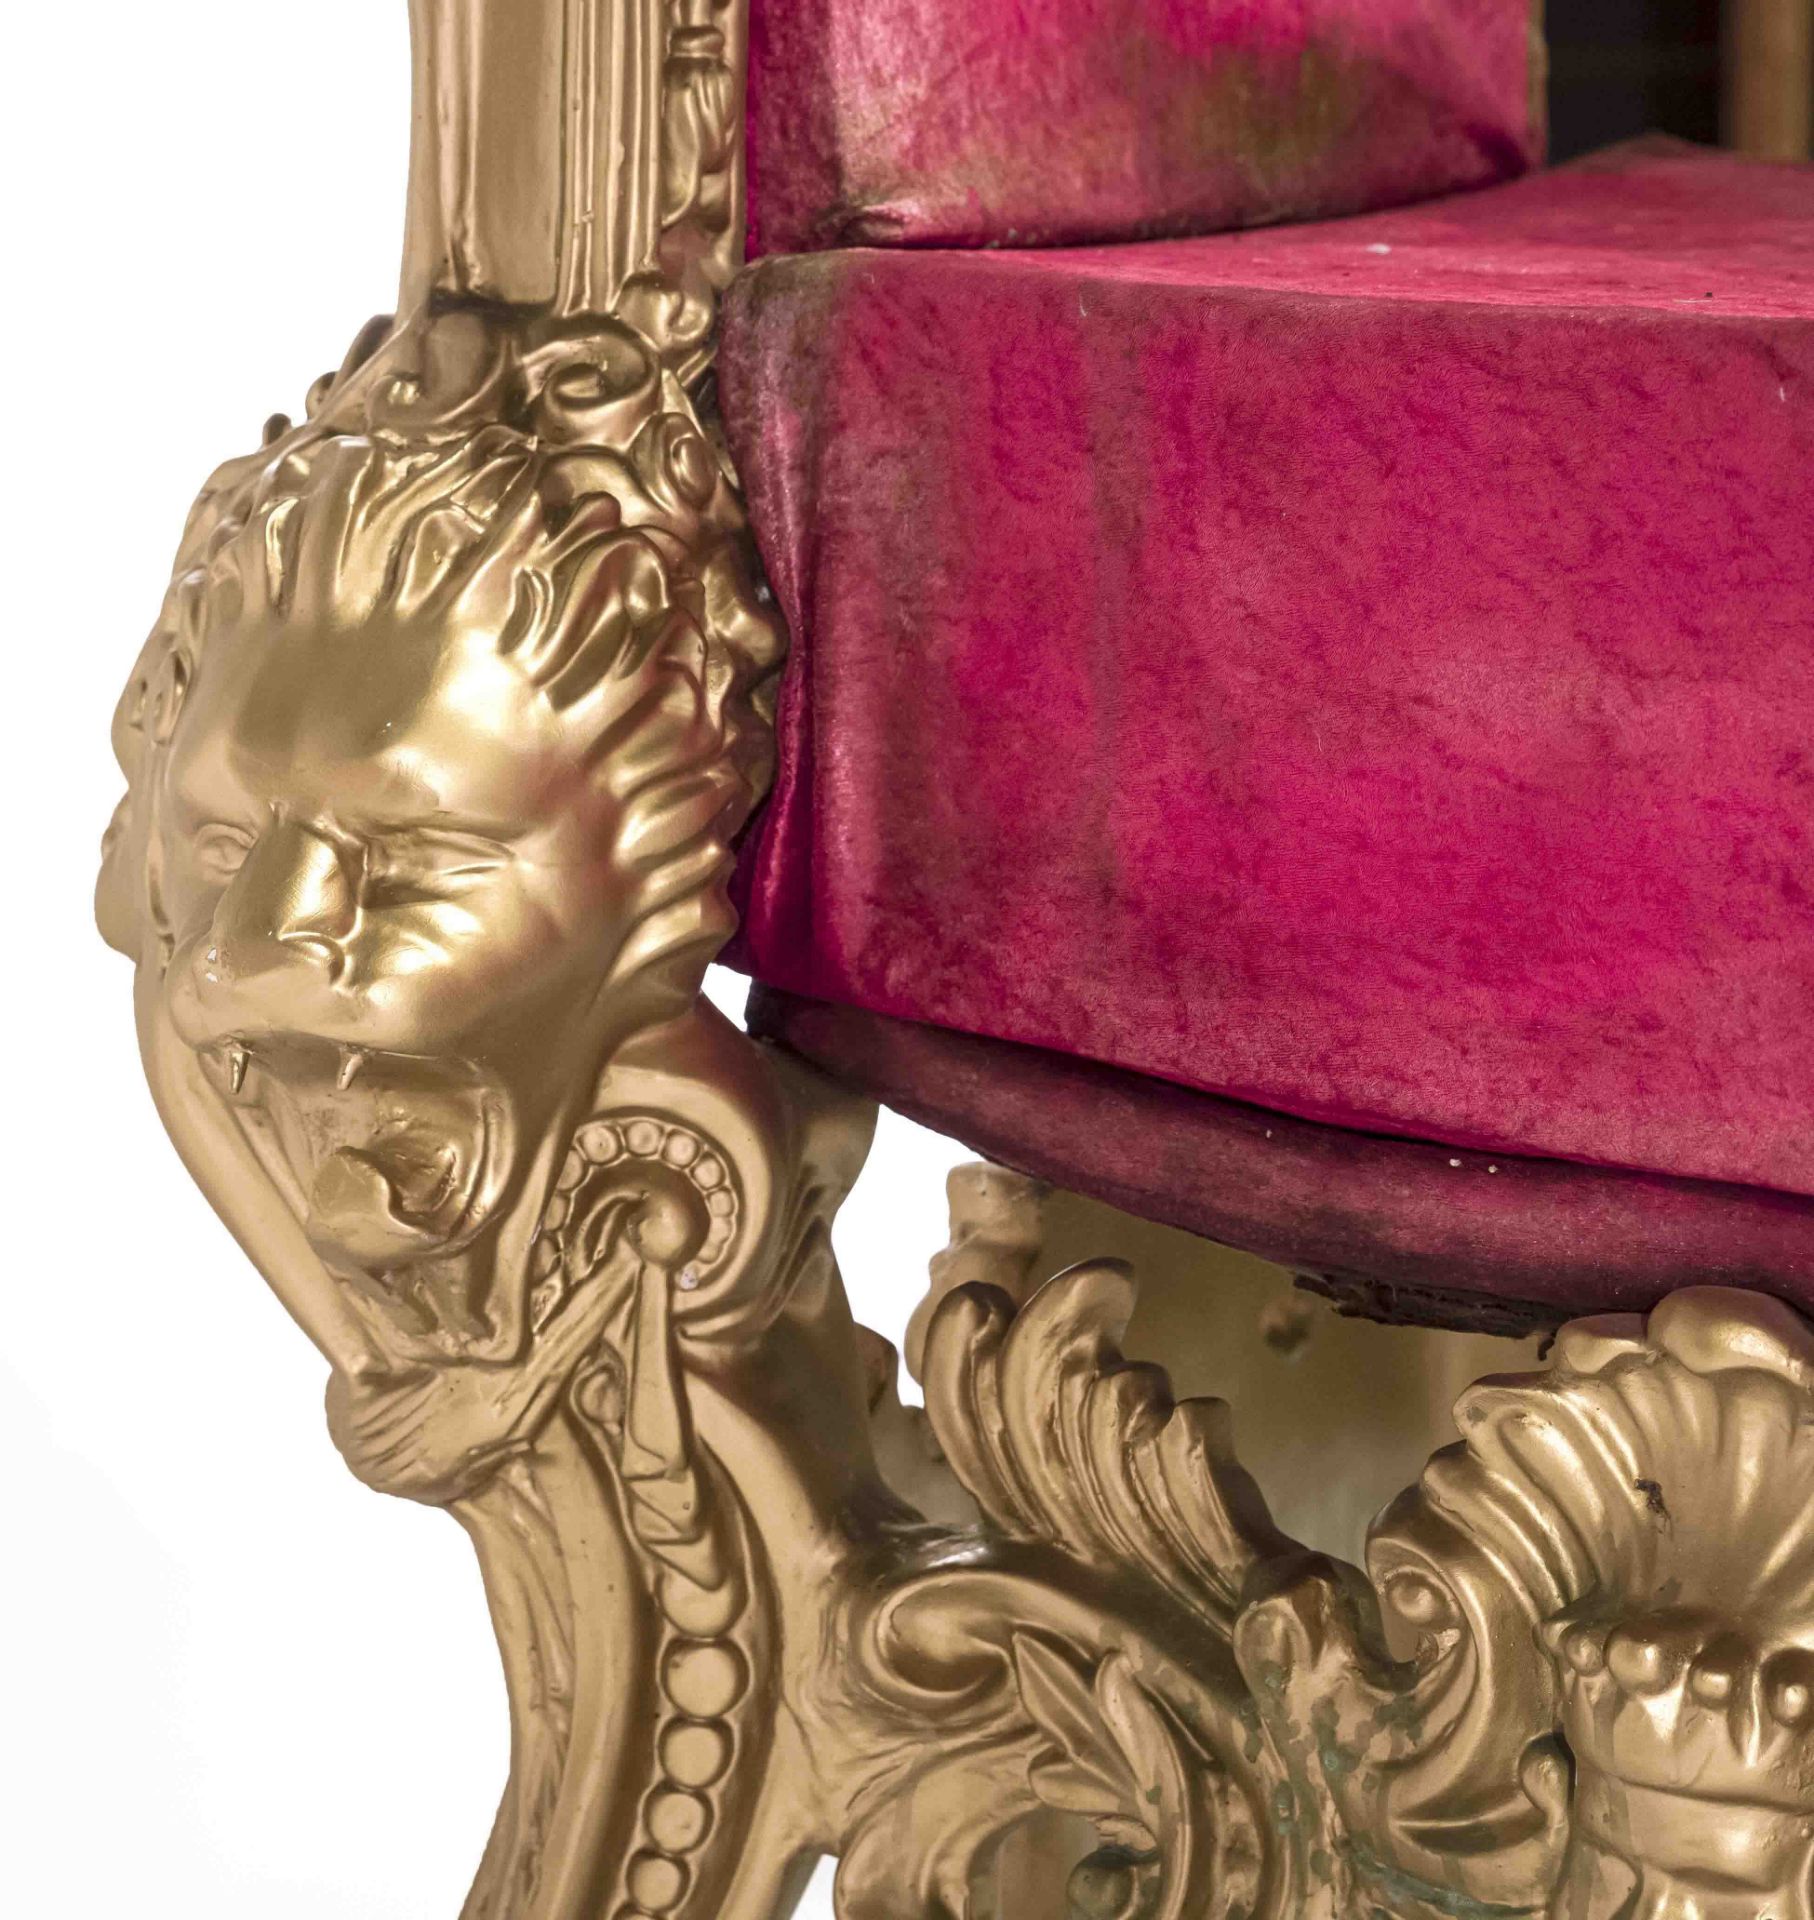 Magnificent Baroque-style throne armchair, 20th century, carved and gilded wood, carved lion's - Image 5 of 5